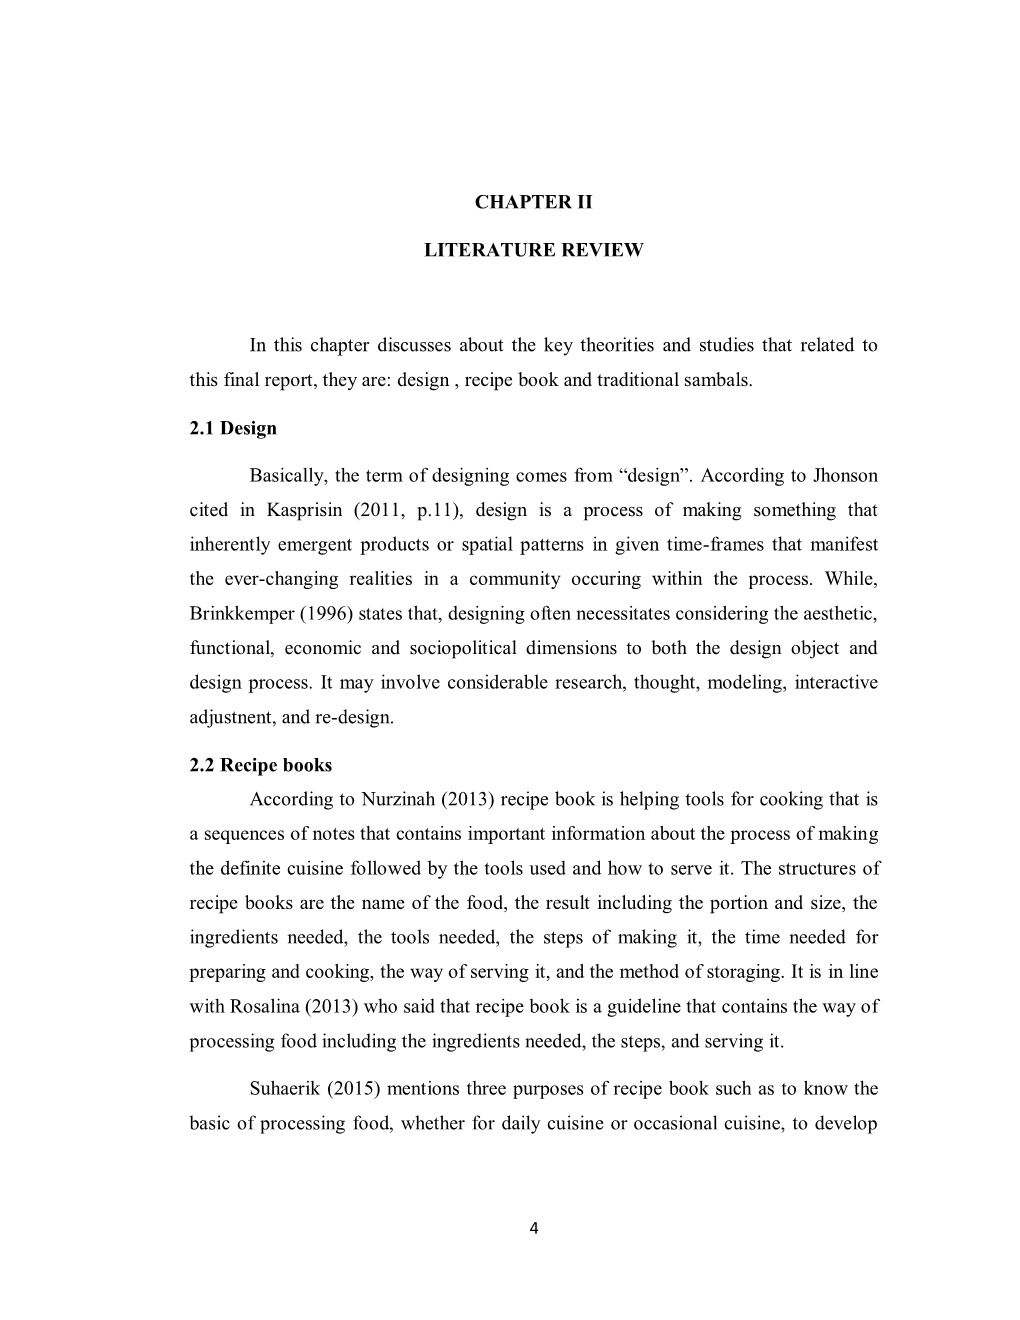 CHAPTER II LITERATURE REVIEW in This Chapter Discusses About The